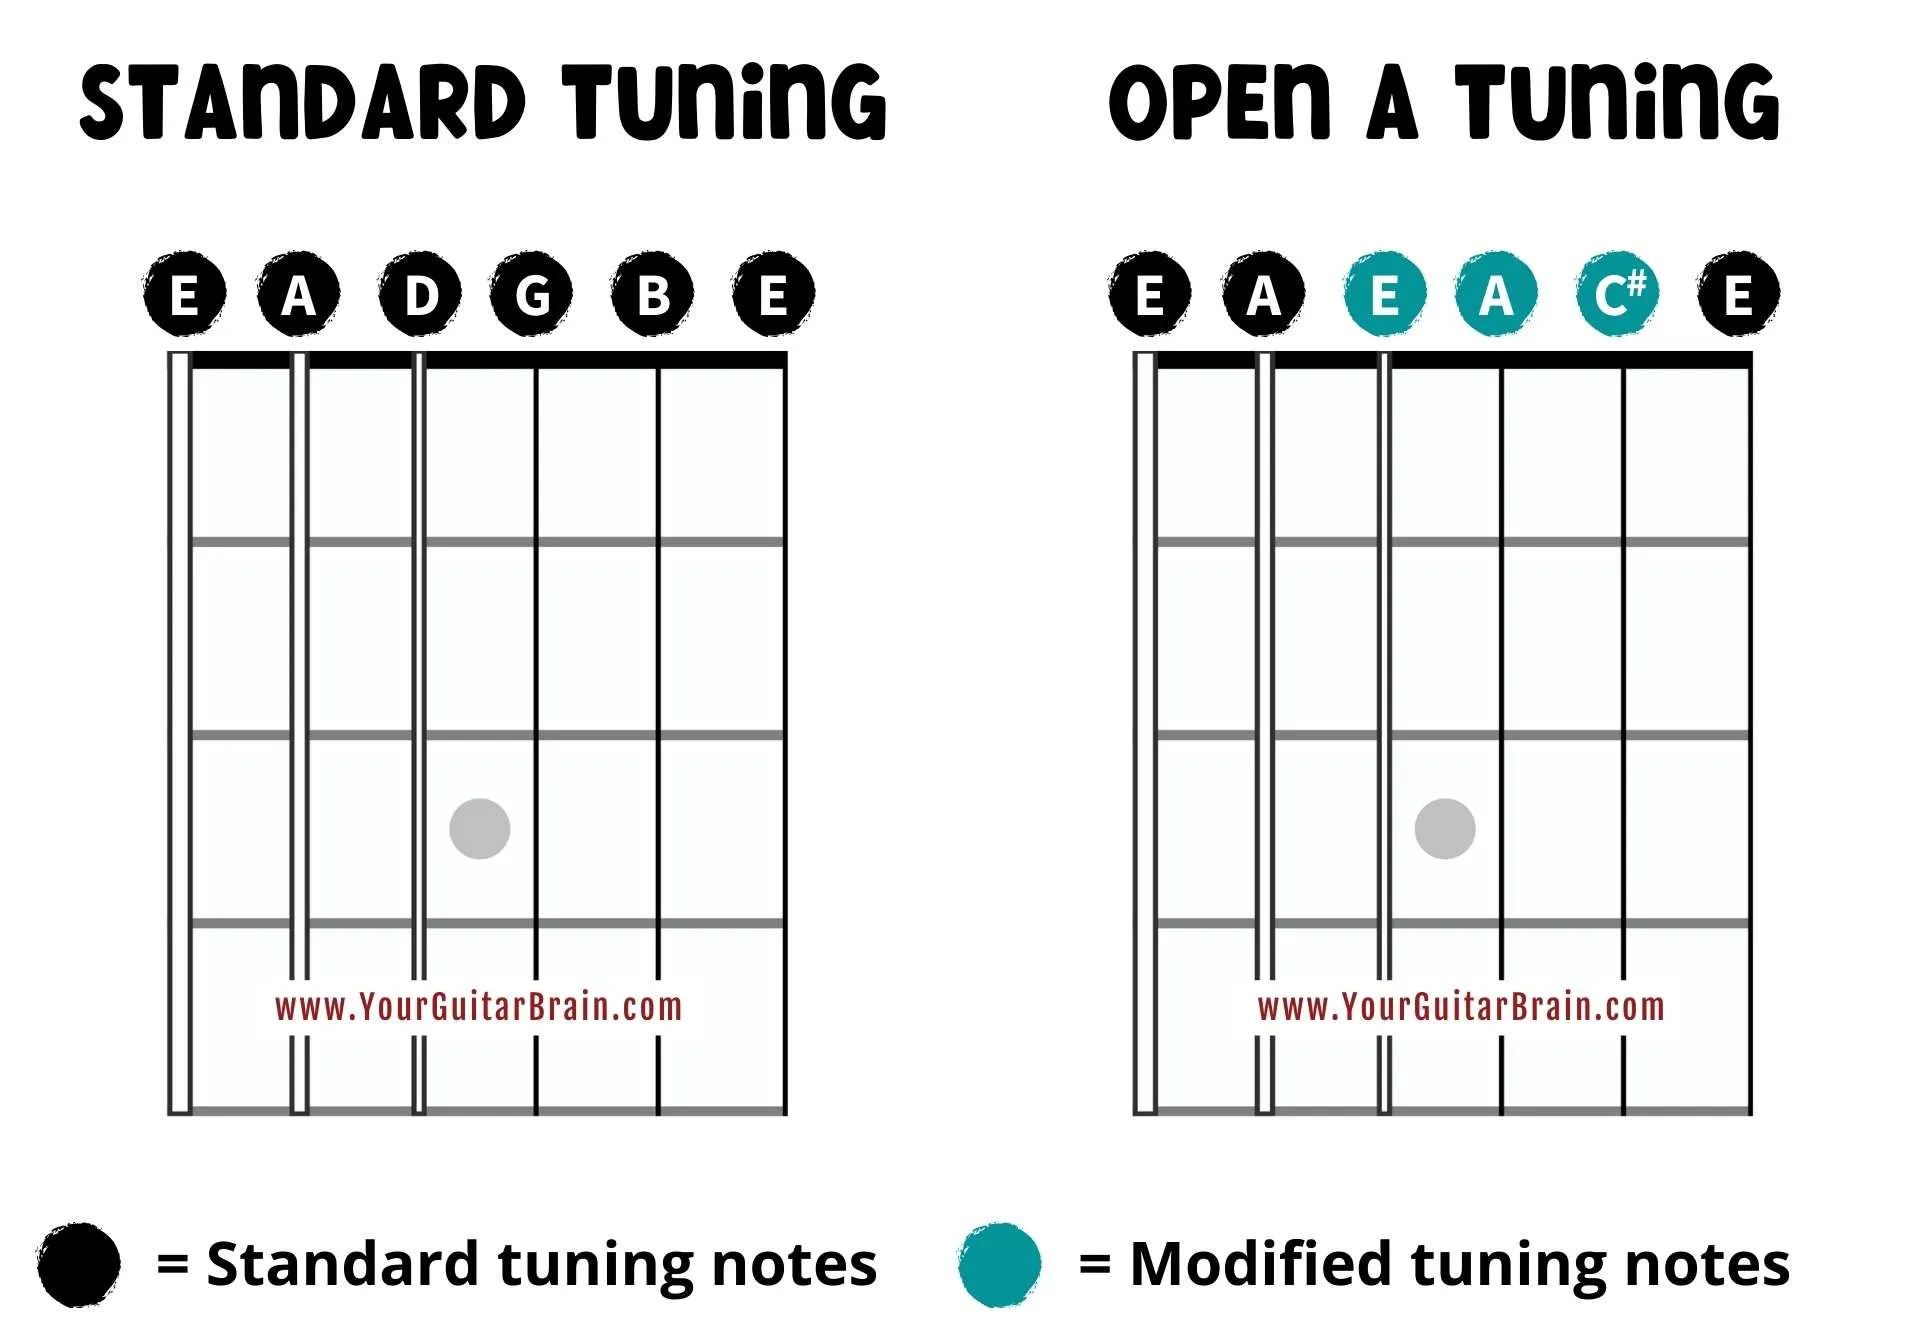 Open A Tuning notes chart